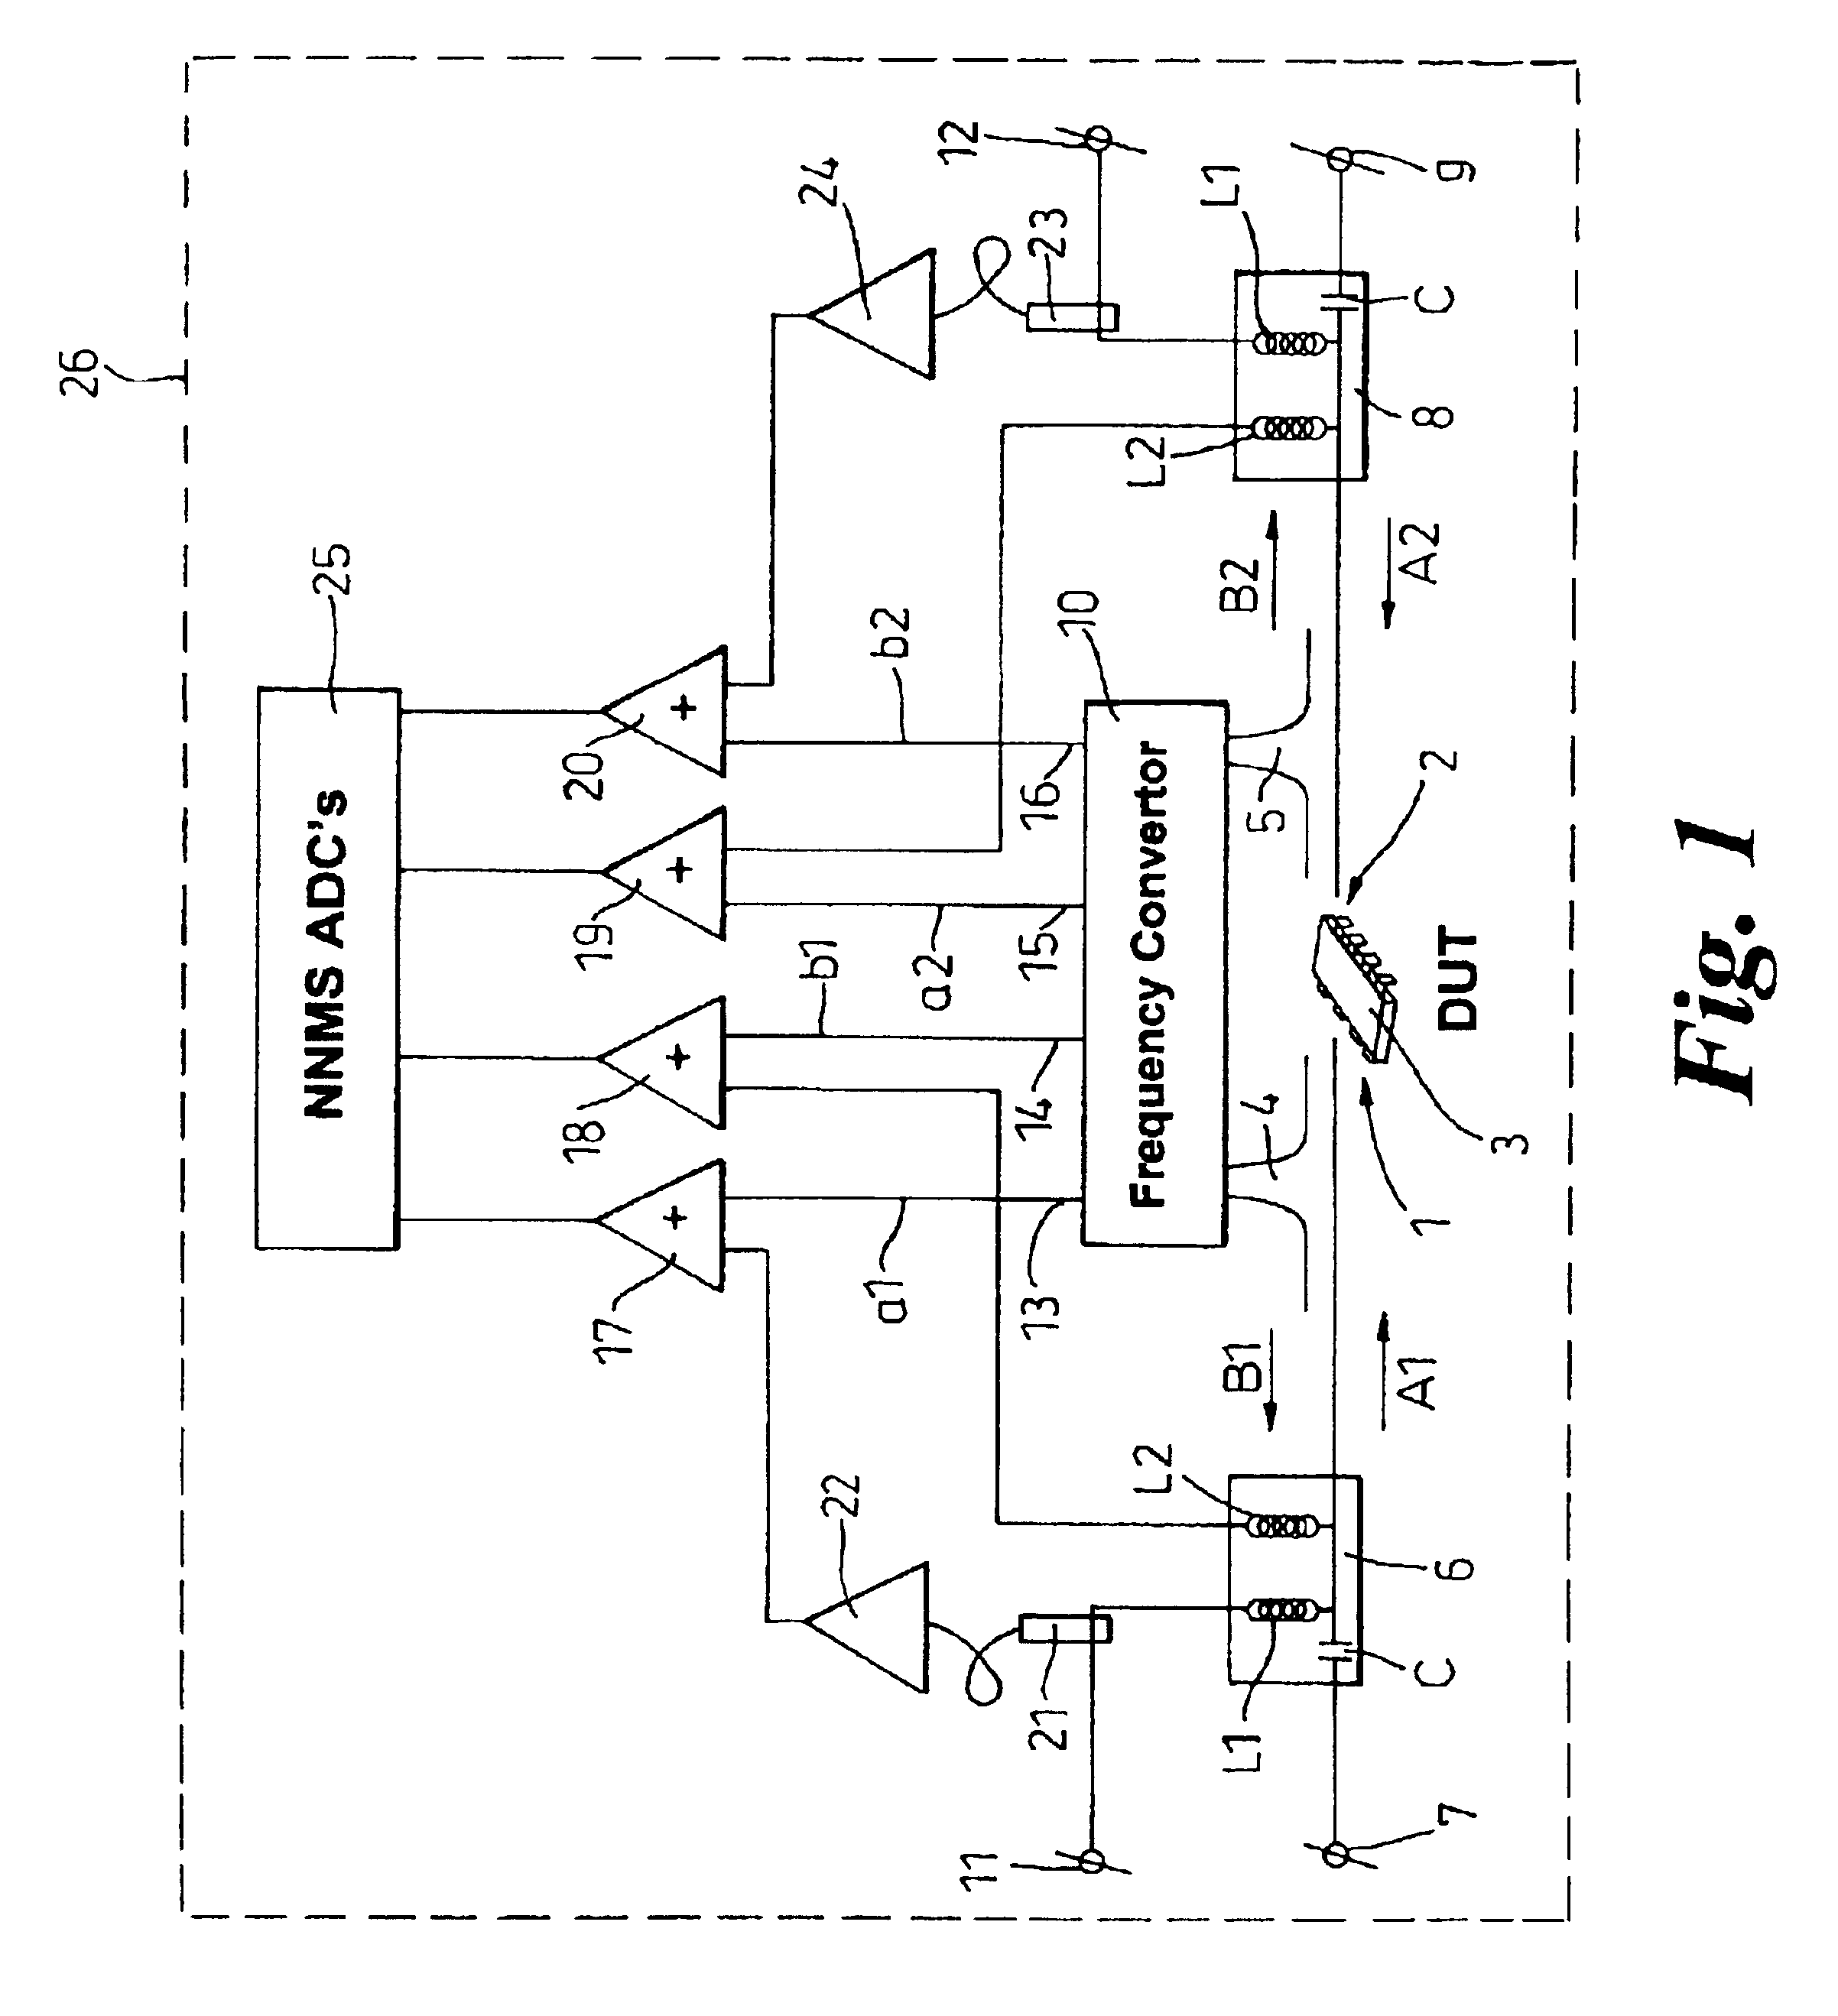 Method of and an apparatus for collecting RF input and output and biasing signal data of a device under test